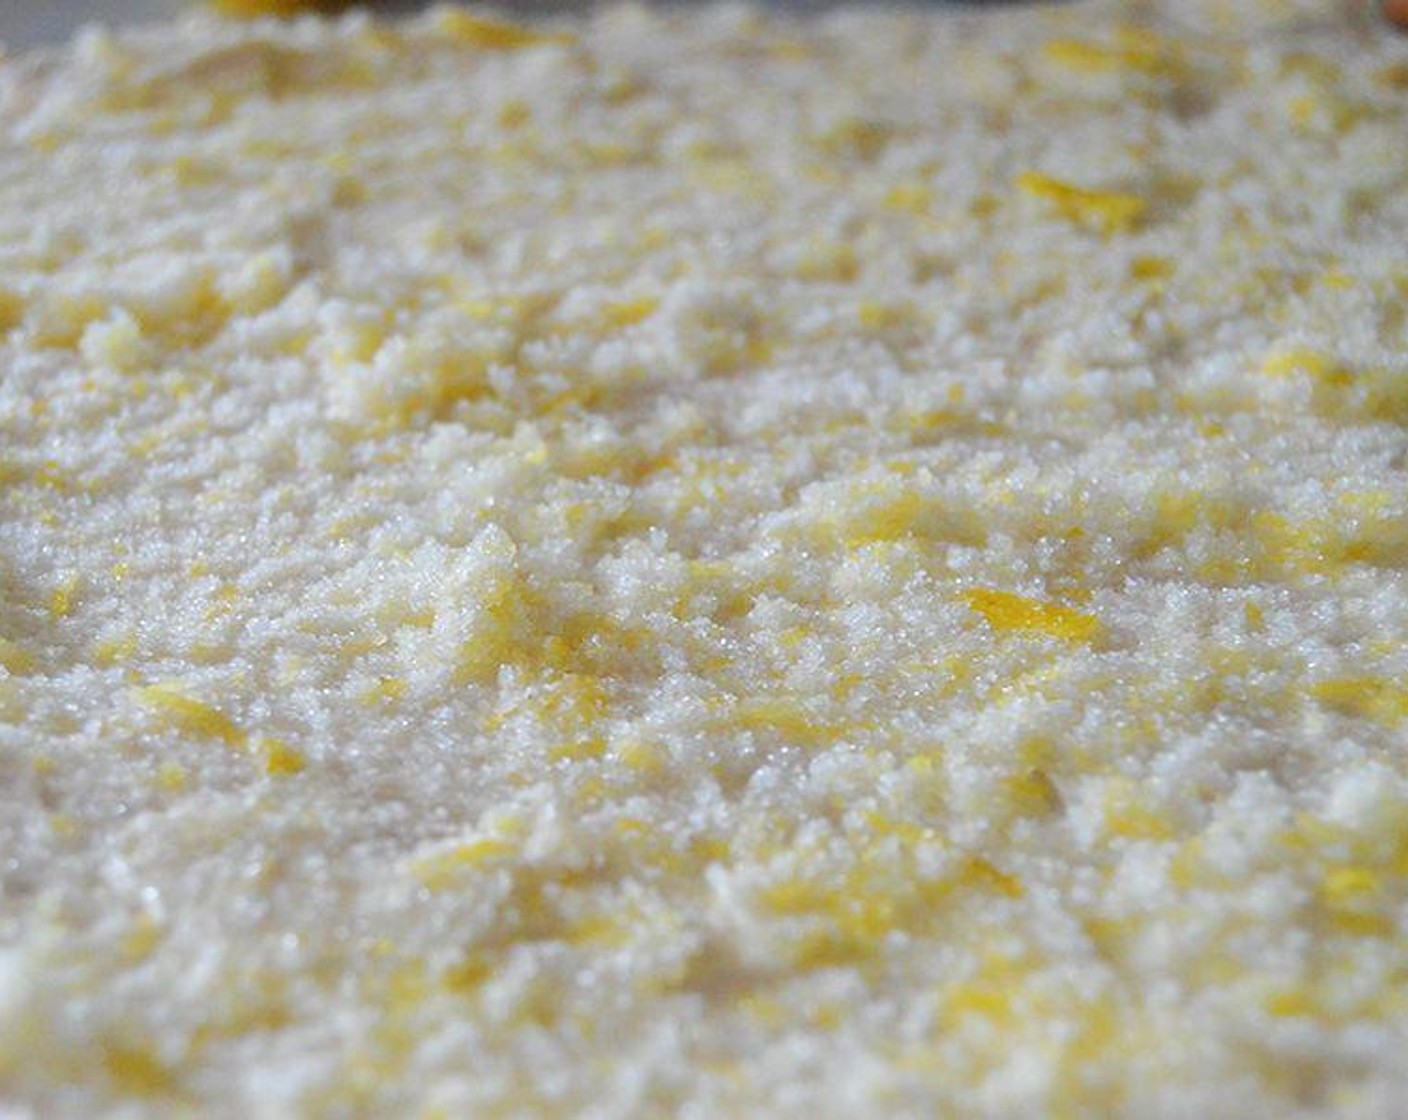 step 6 For the filling, combine the zest from Lemons (2), Granulated Sugar (3/4 cup), Butter (1/4 cup) and Vanilla Extract (1/2 tsp).